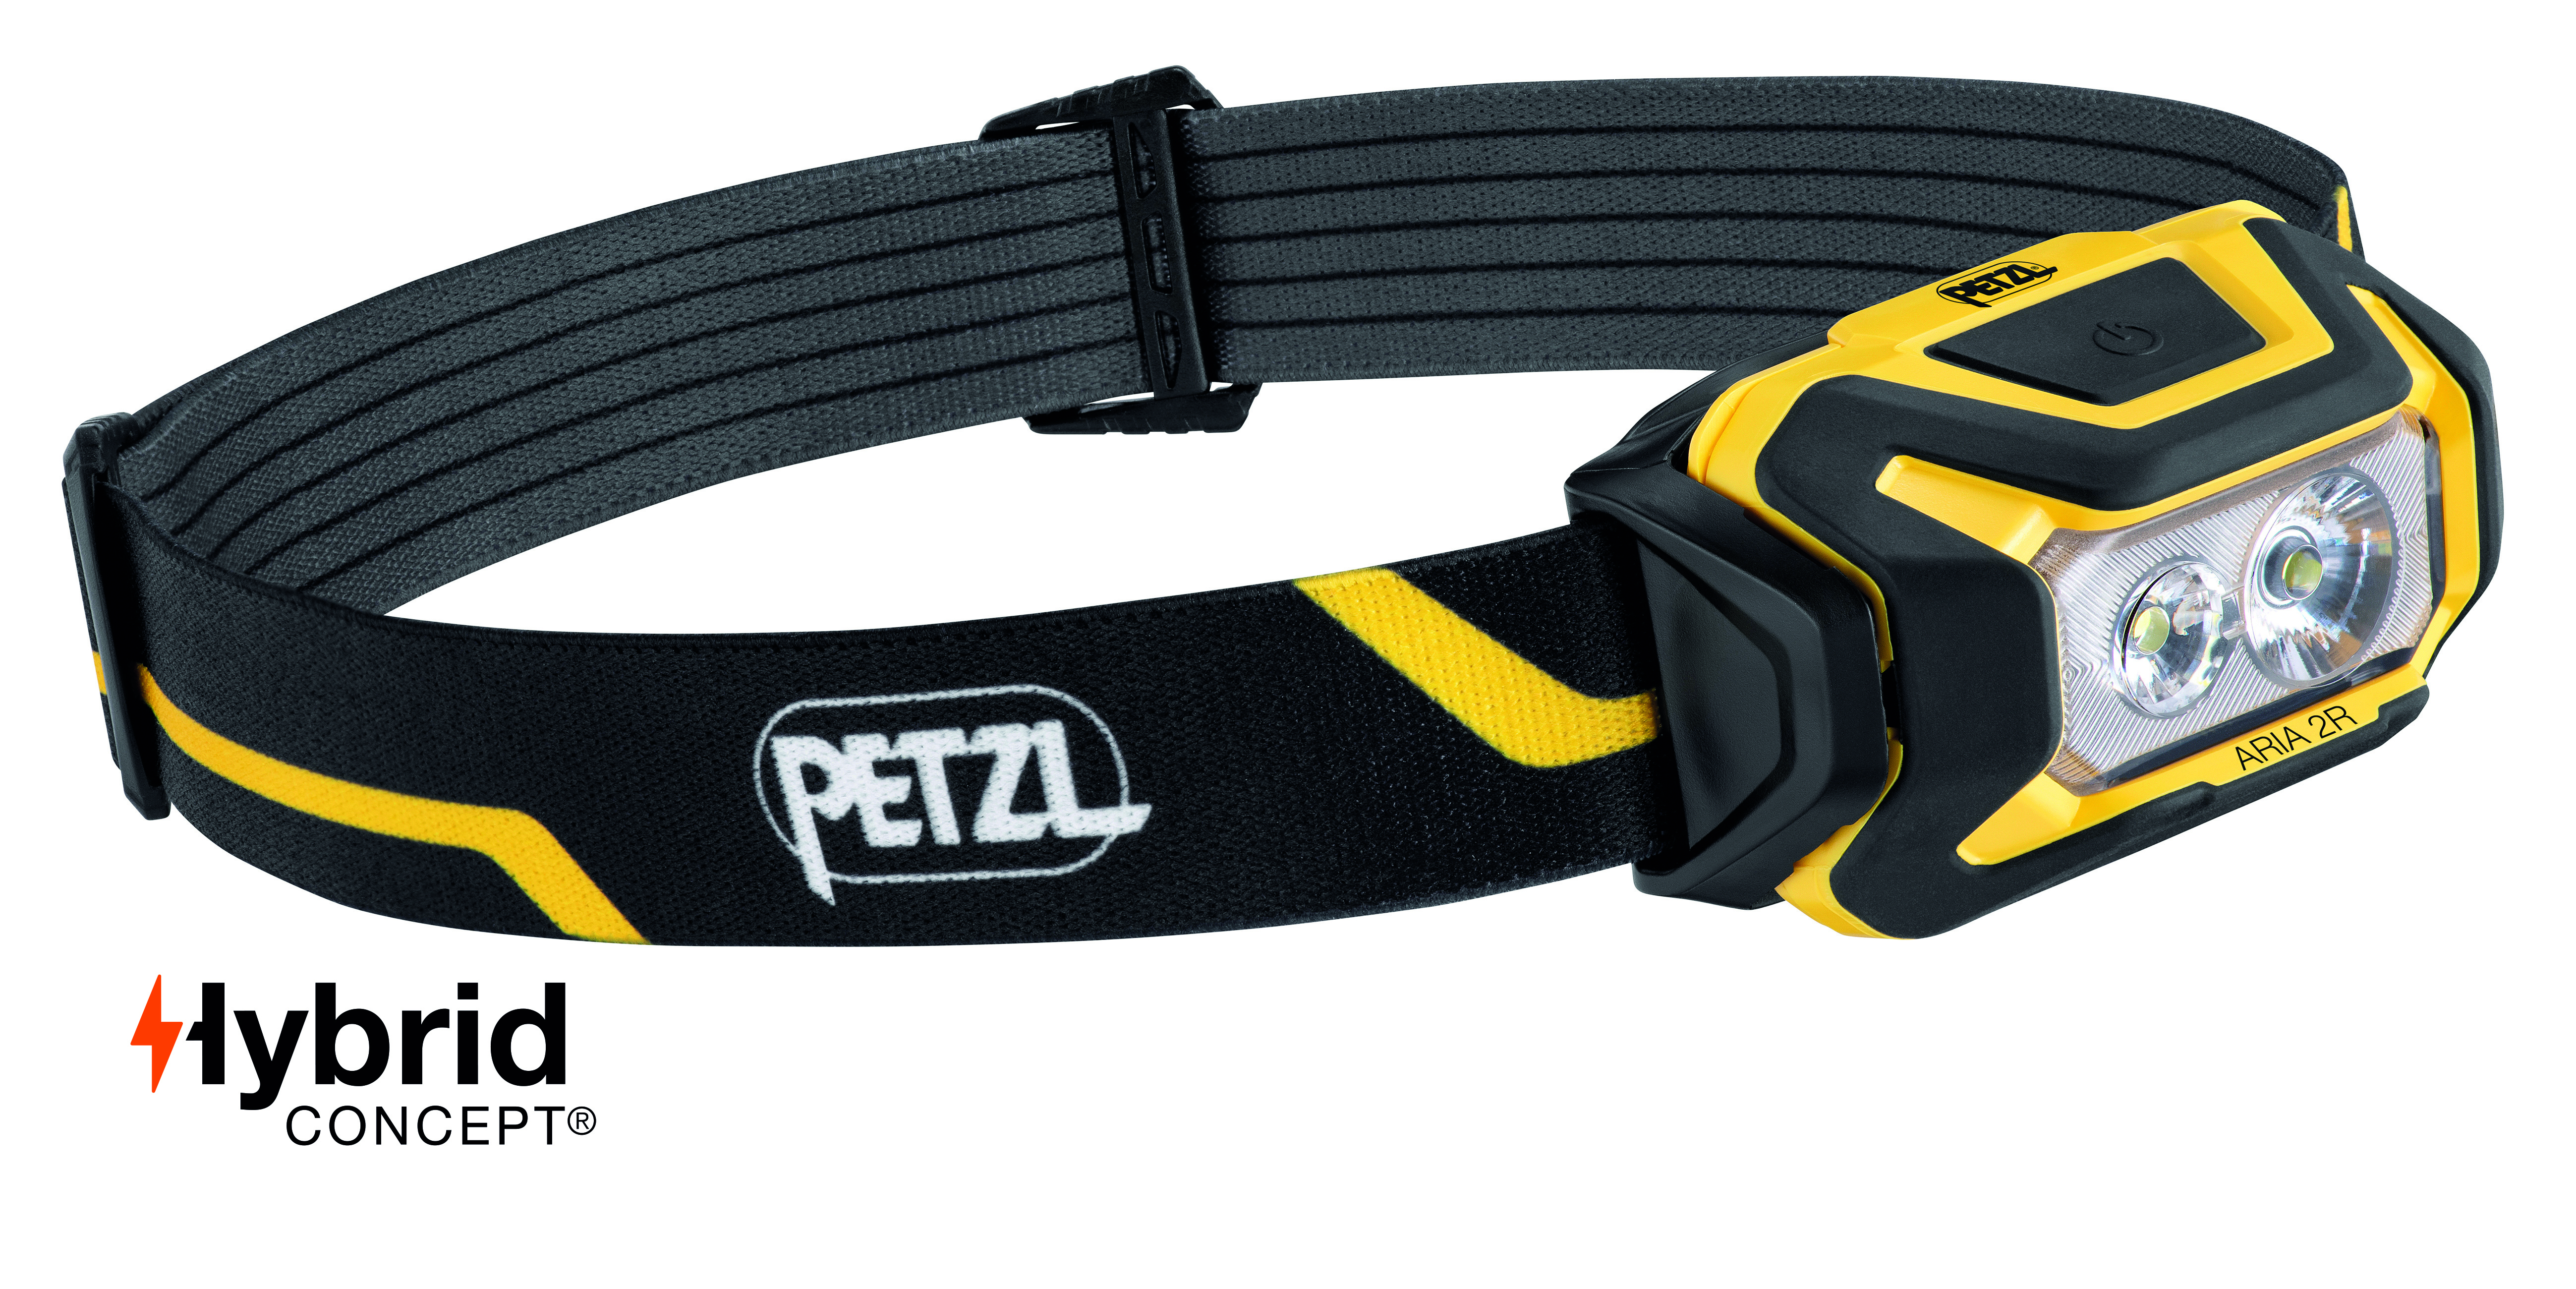 Petzl ARIA 2R Compact Headlamp from Columbia Safety